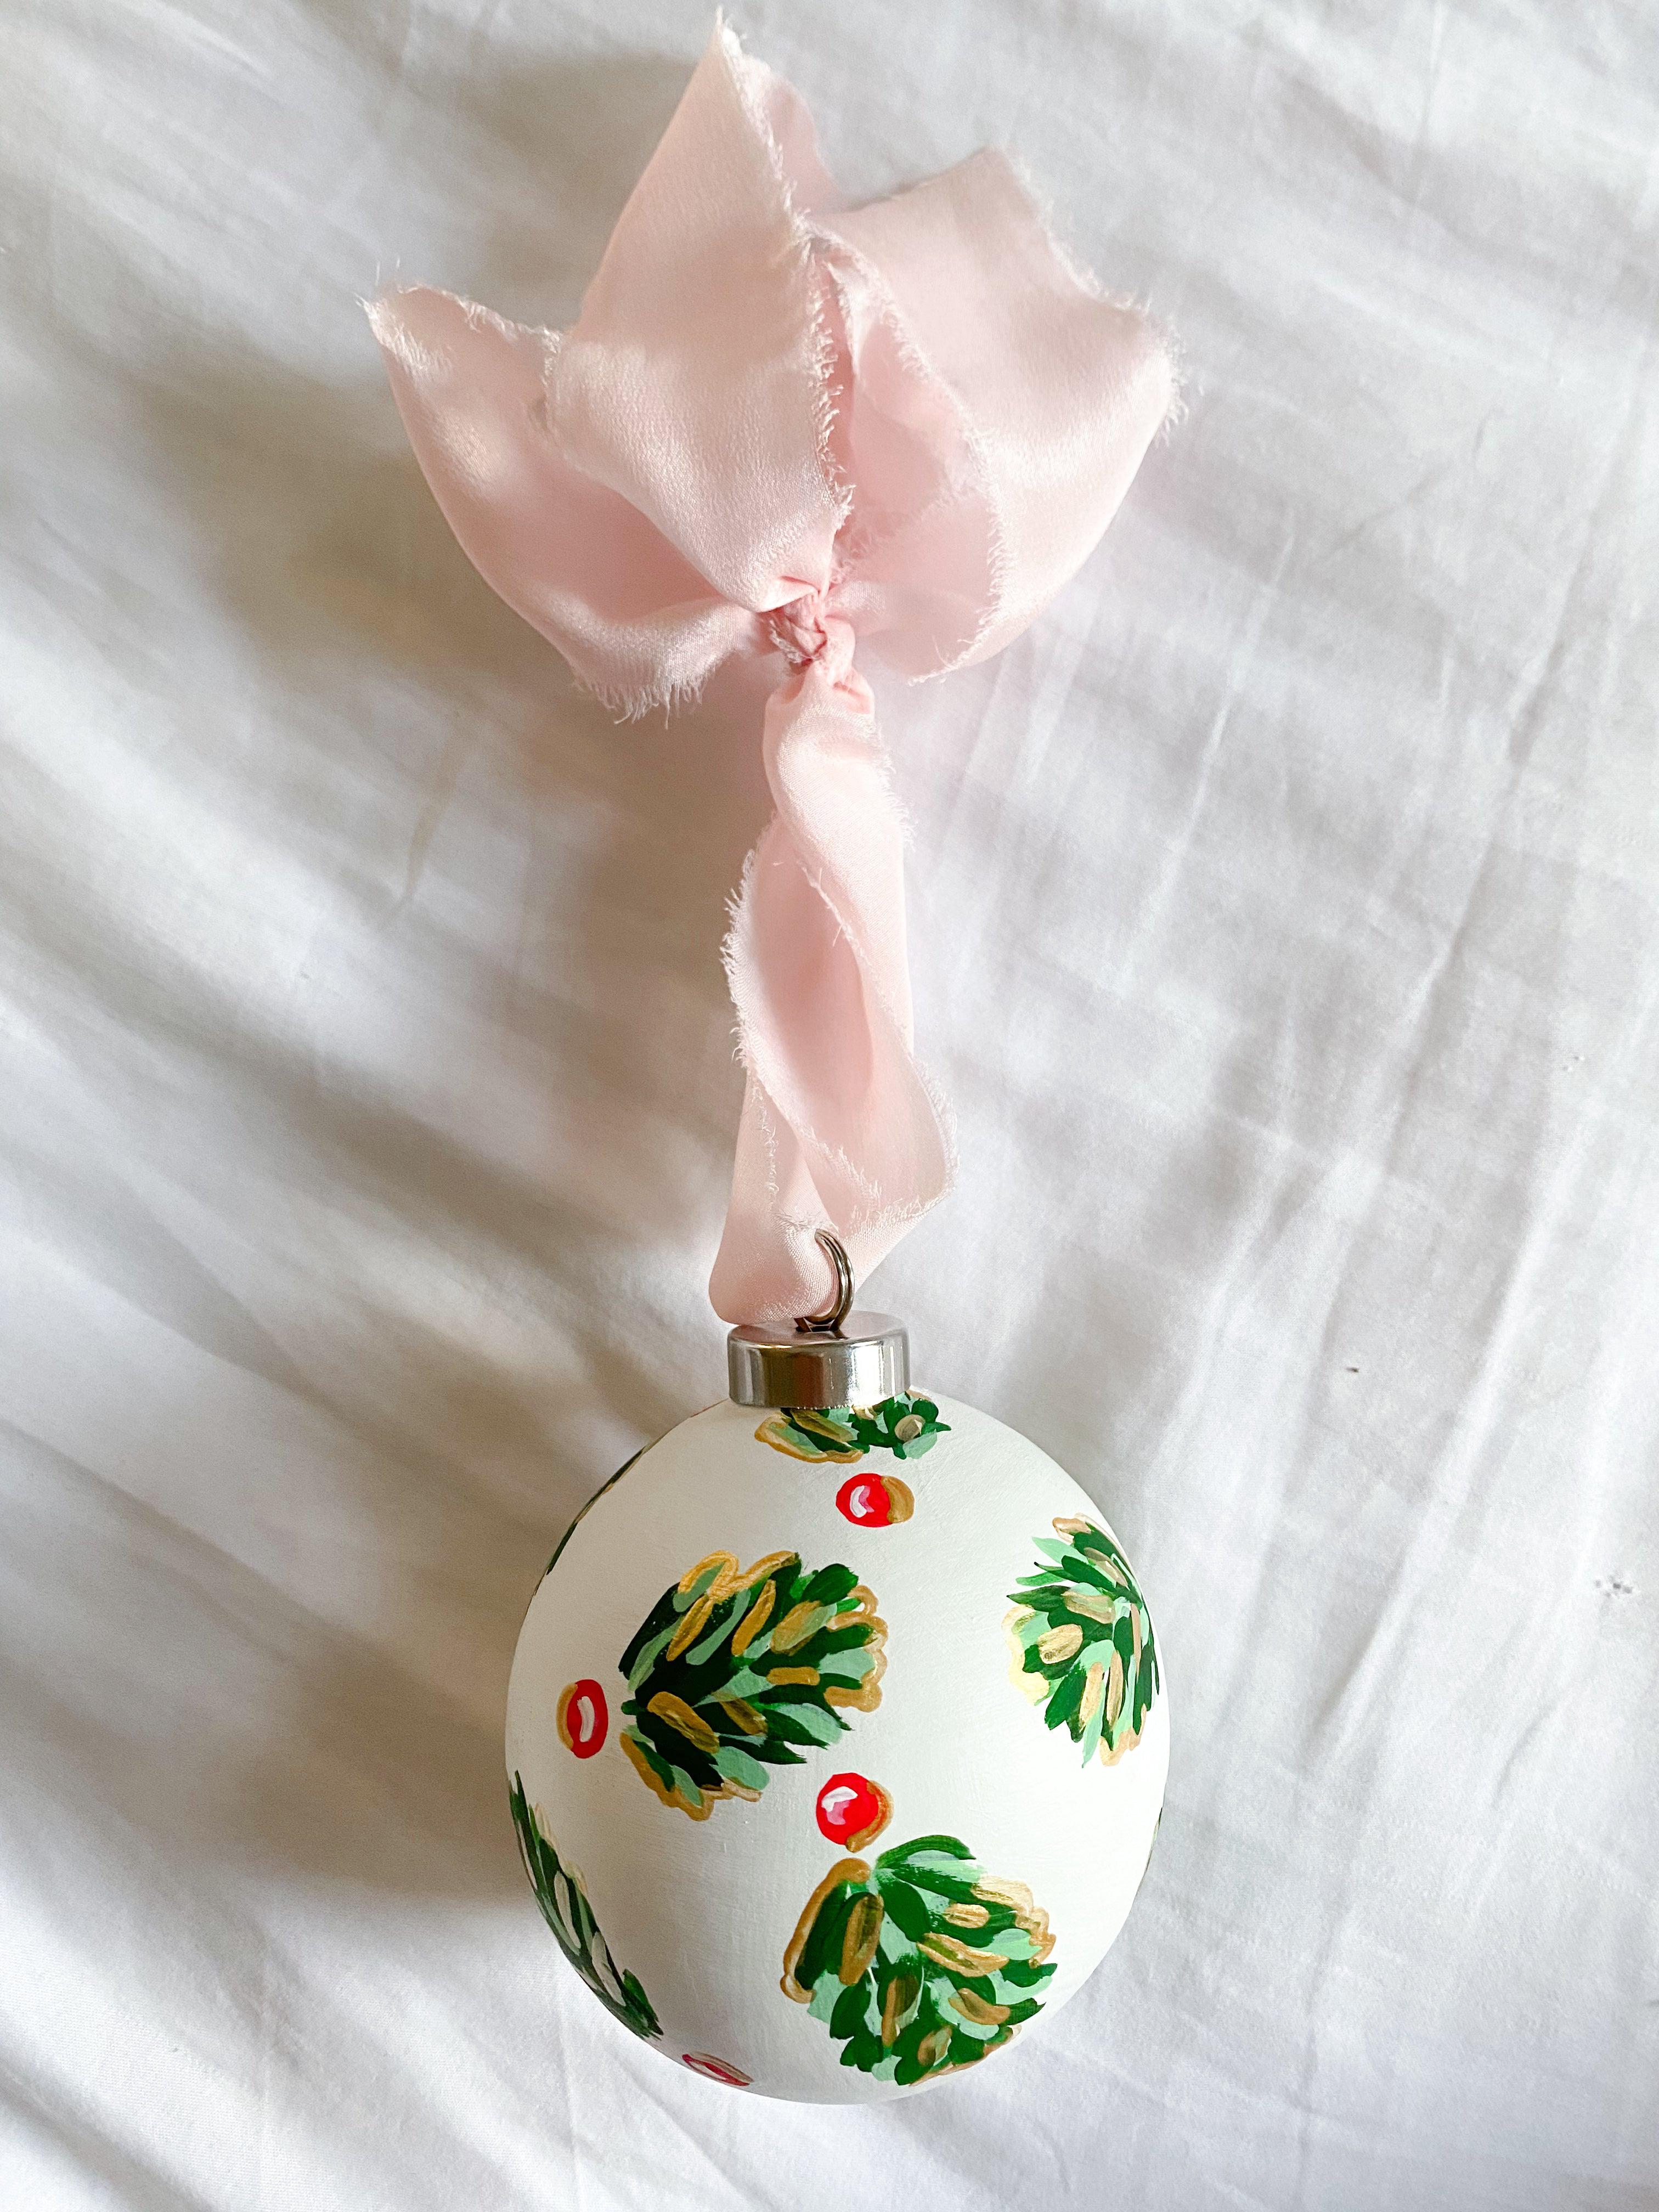 Winter Pearl Golden Holly Bauble-Ceramic Hand-Painted Keepsake Ornament | Measuring 3" x 3" | Features the Golden Holly design with an ivory base and shimmery gold accents | Coated with a protective matte finish that will keep it protected and shimmering year after year | Your color choice of silk crepe ribbon with a frayed edge for hanging | Each bauble is slightly different with potential small imperfections due to the hand-painted nature, making each one special and unique!-The Singing Little Bird